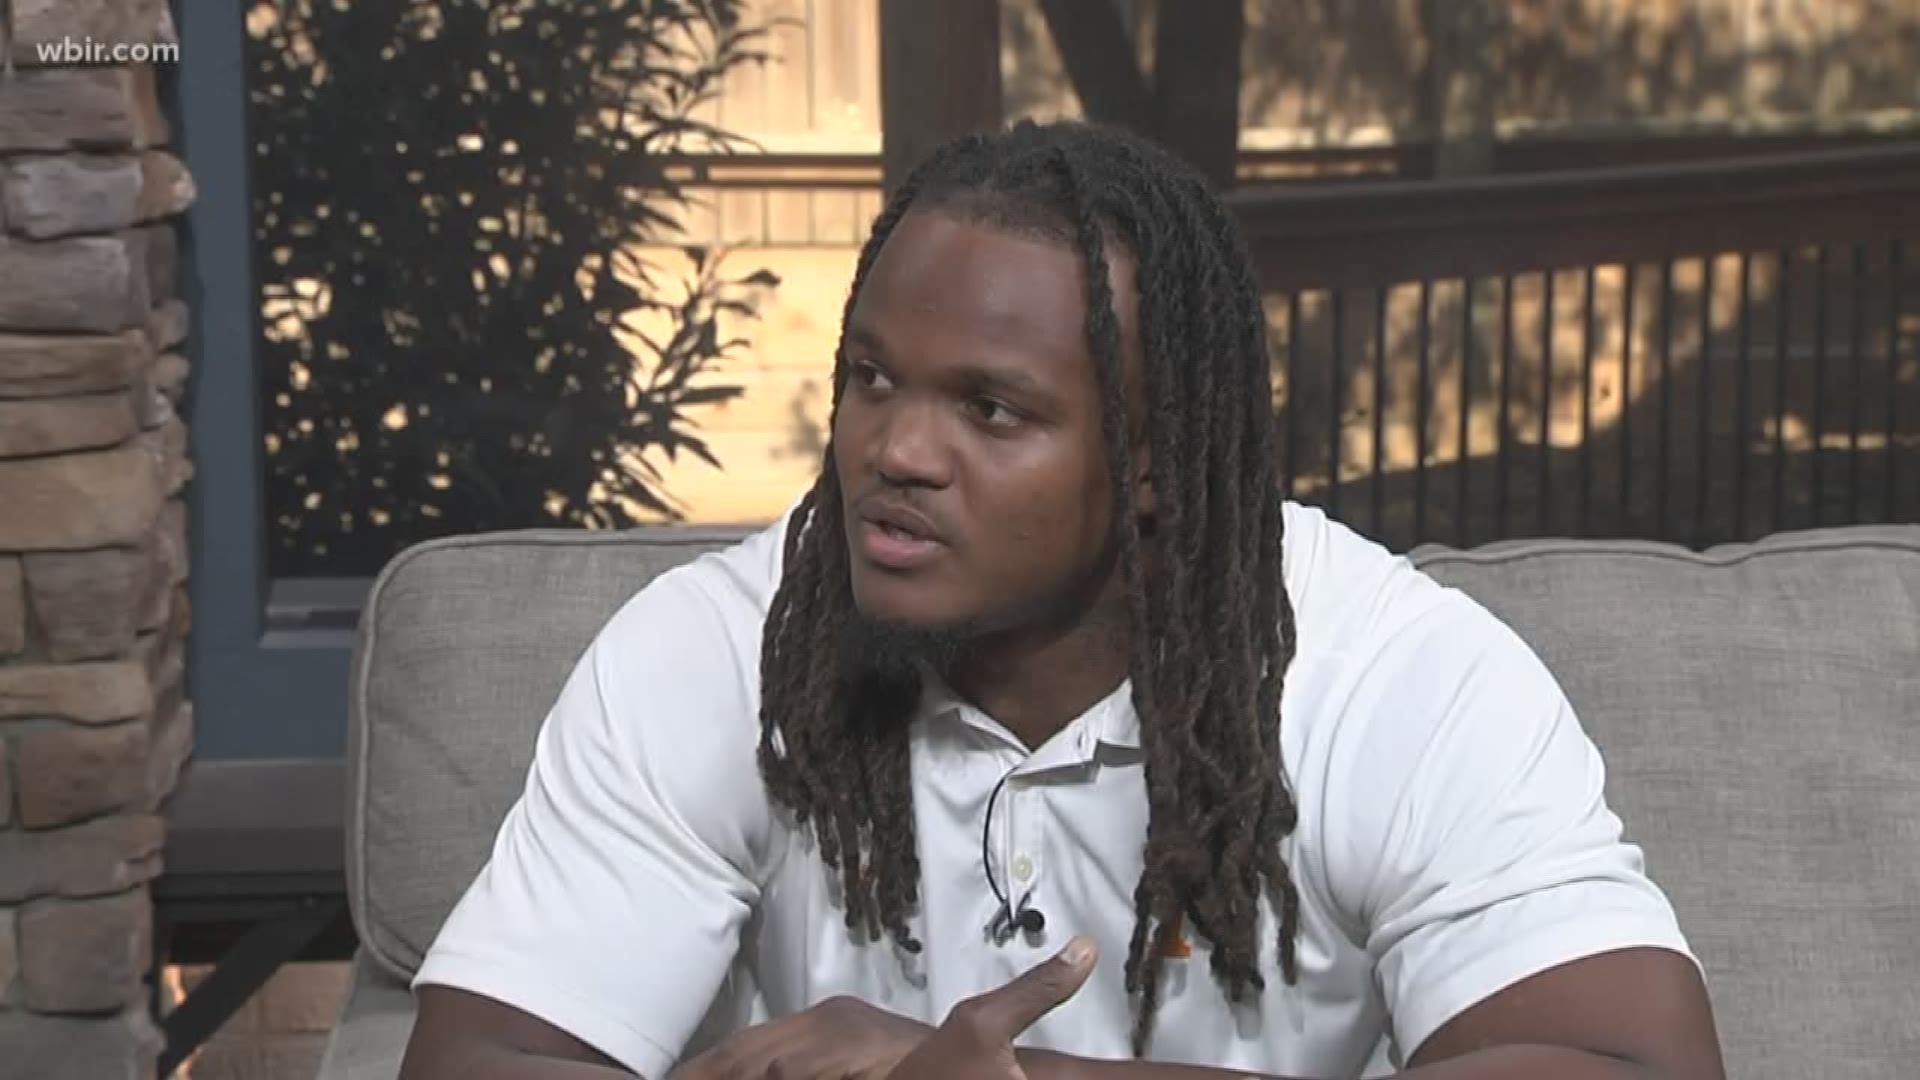 Curt Maggitt talks about a special event called "A Night To Remember" he's taking part in on Friday, April 12, 2019 at 6pm at Hops & Hollers (937 N. Central St.). Partial proceeds will benefit the Change Center. Follow him on social media @CurtMaggitt. This is a +21 event. April 10, 2019-4pm.